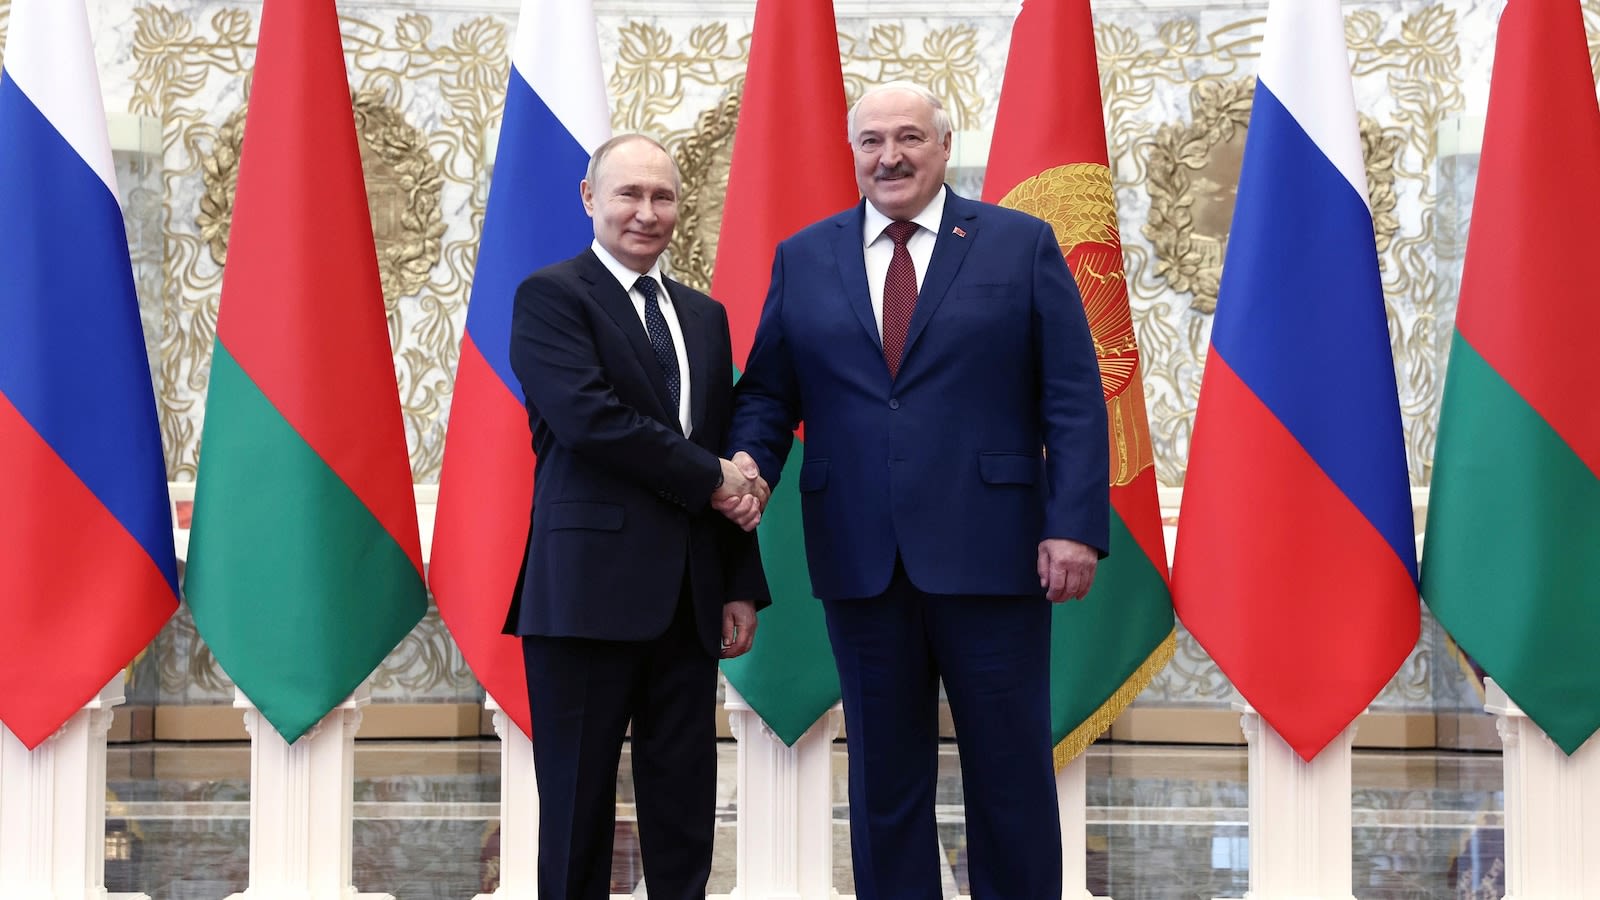 On a visit to his Belarusian ally, Putin questions Zelenskyy's legitimacy as Ukraine's leader